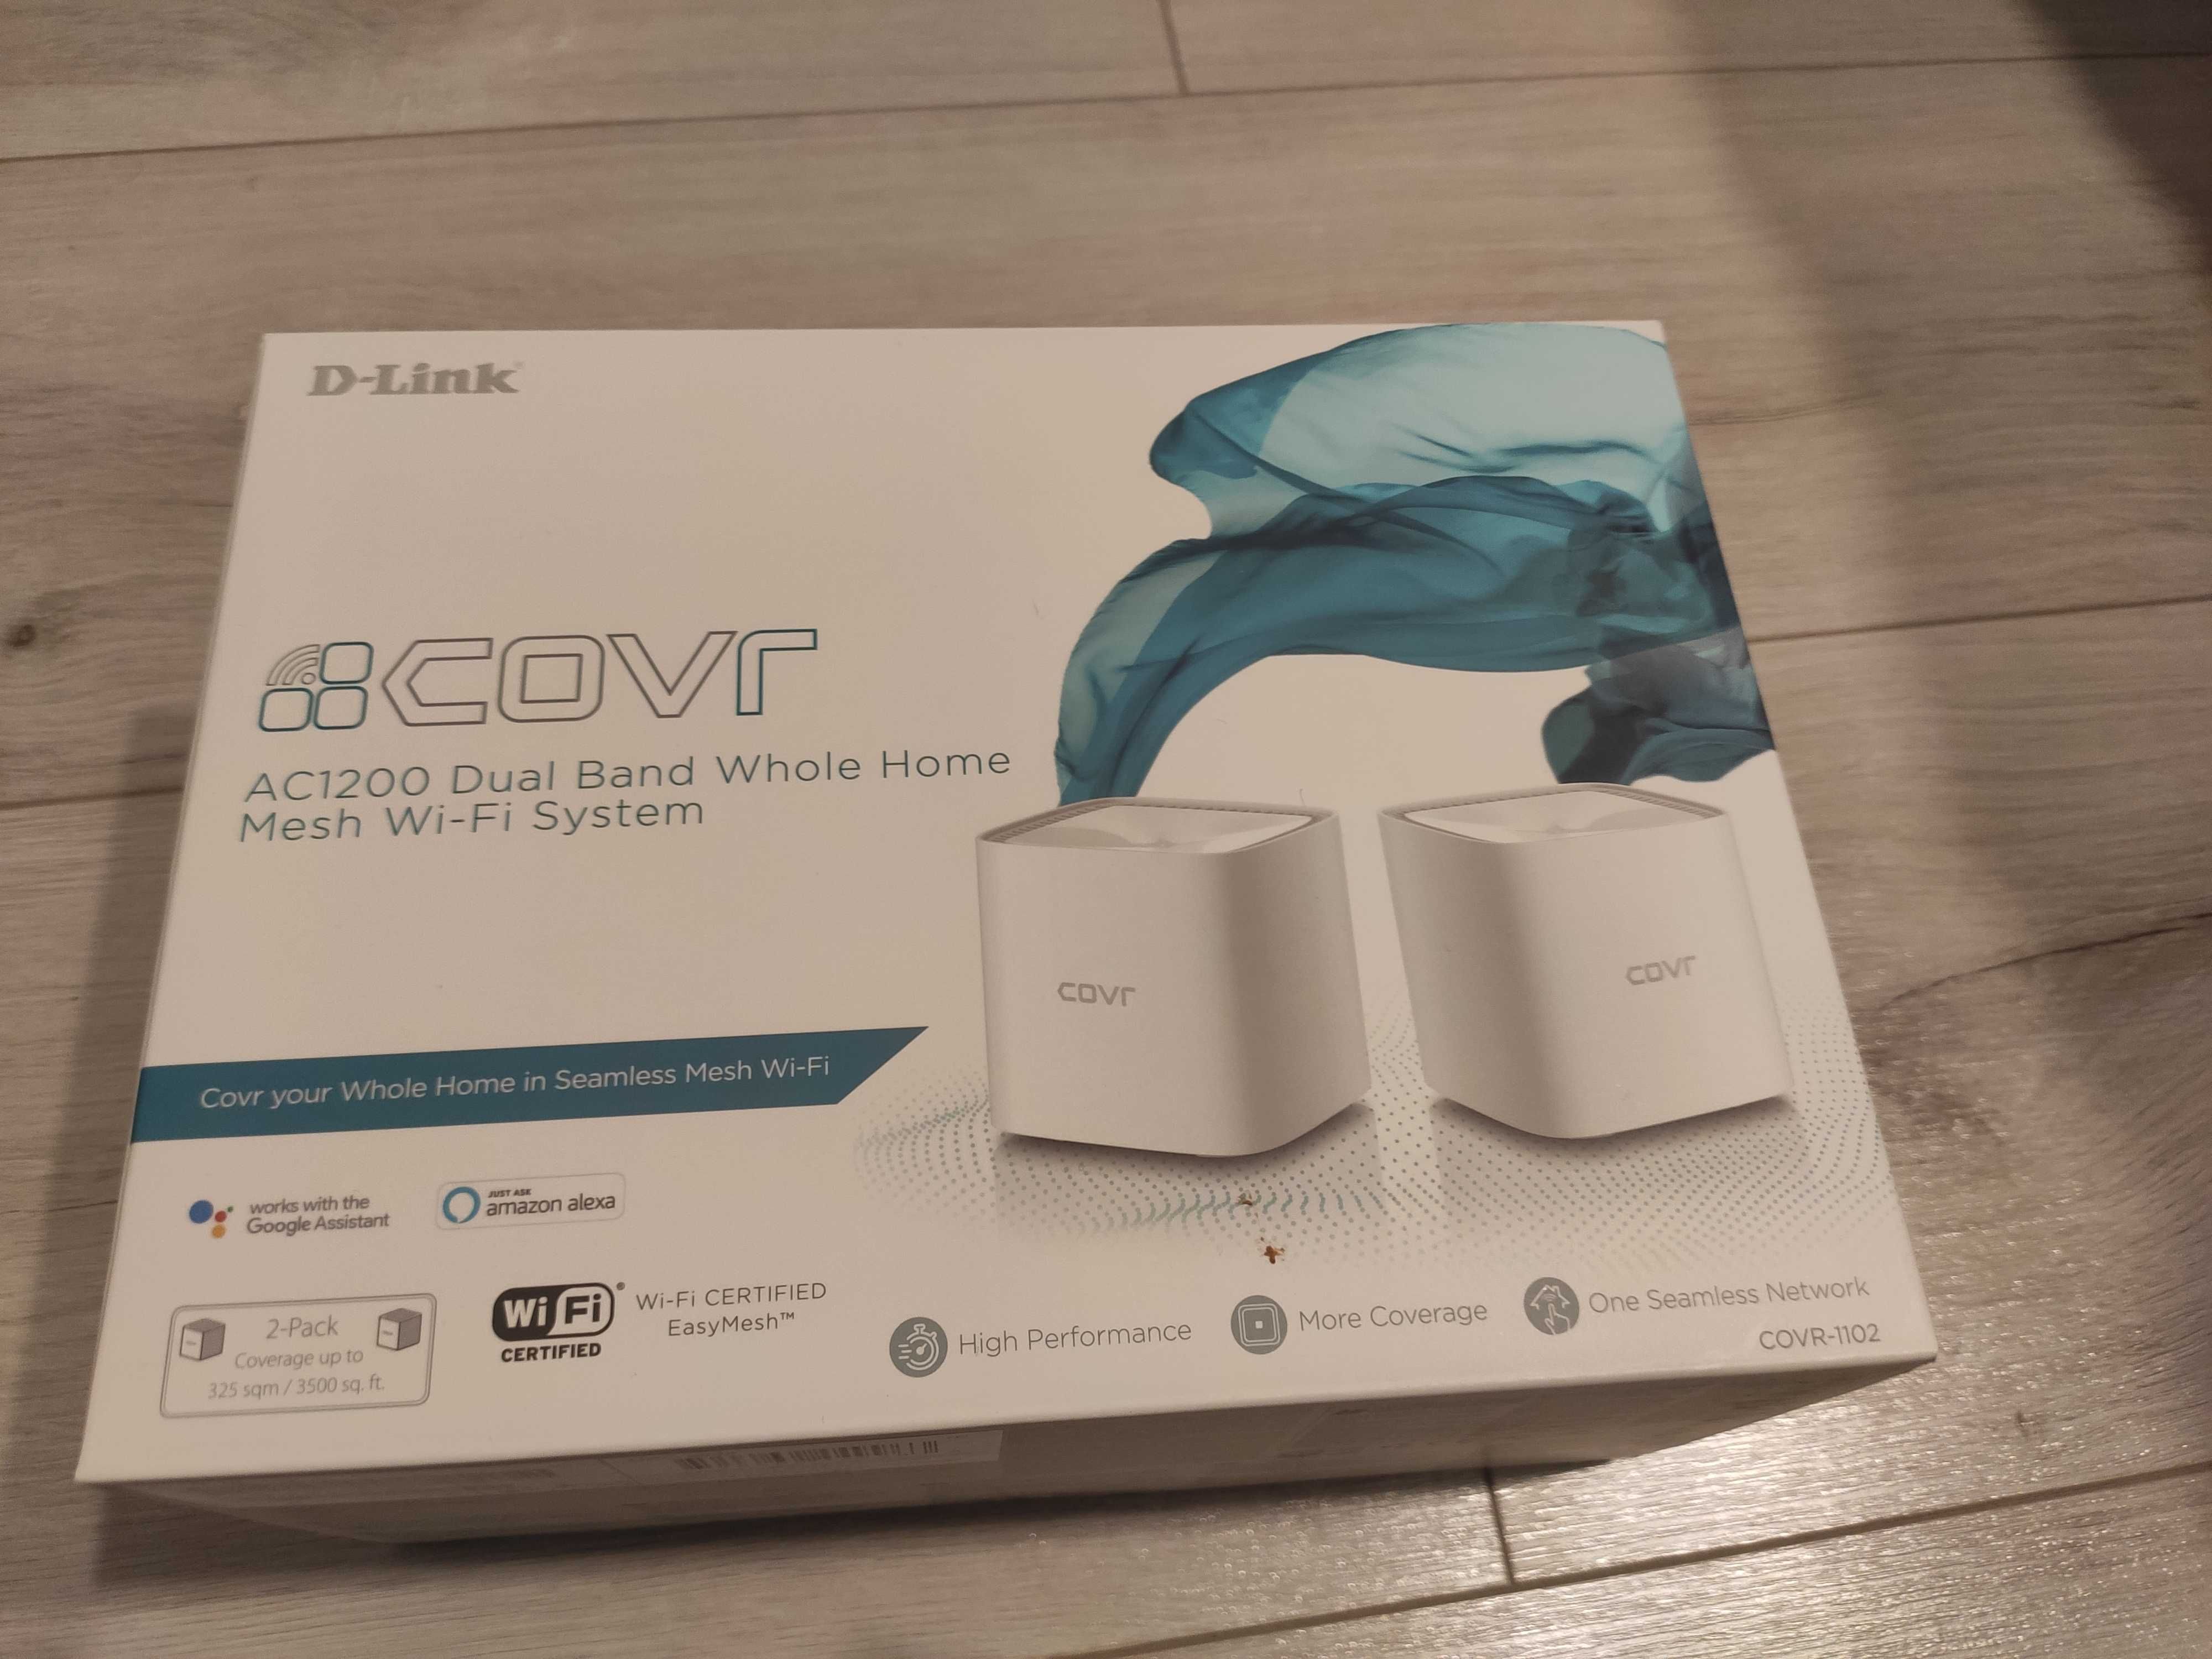 Nowy Router D-Link COVR - 1102 WiFI 5 1200 Mb/s